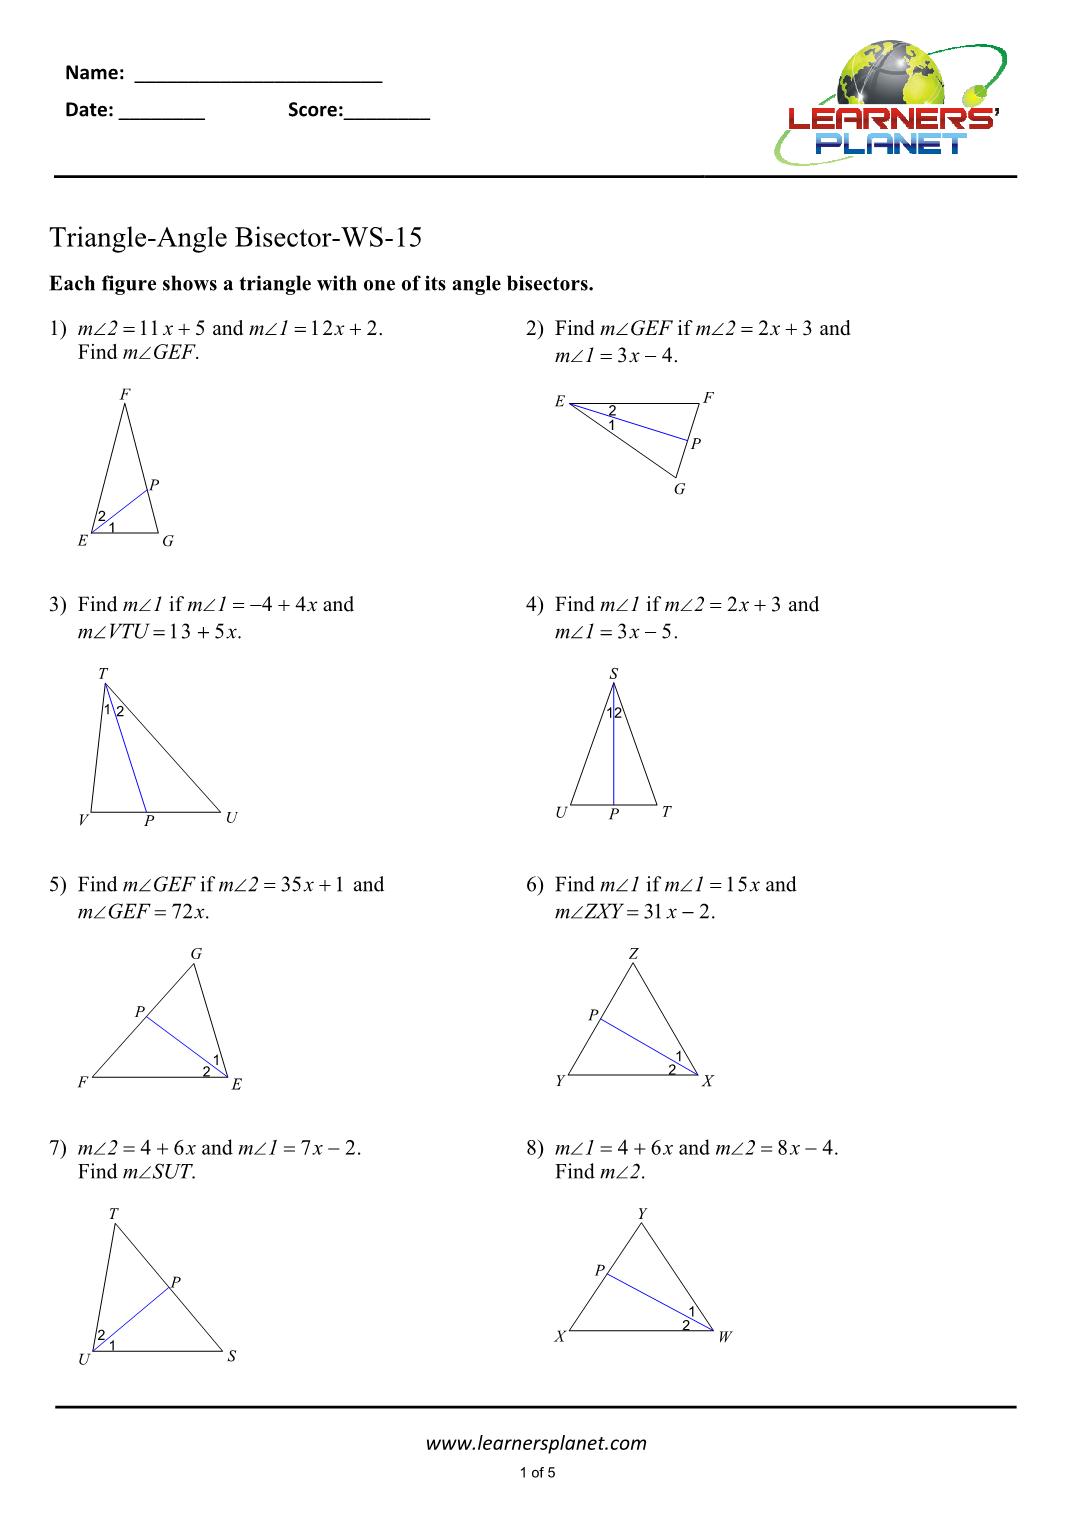 Copying And Bisecting Angles Worksheet  FuelHandler With Regard To Angle Bisector Theorem Worksheet